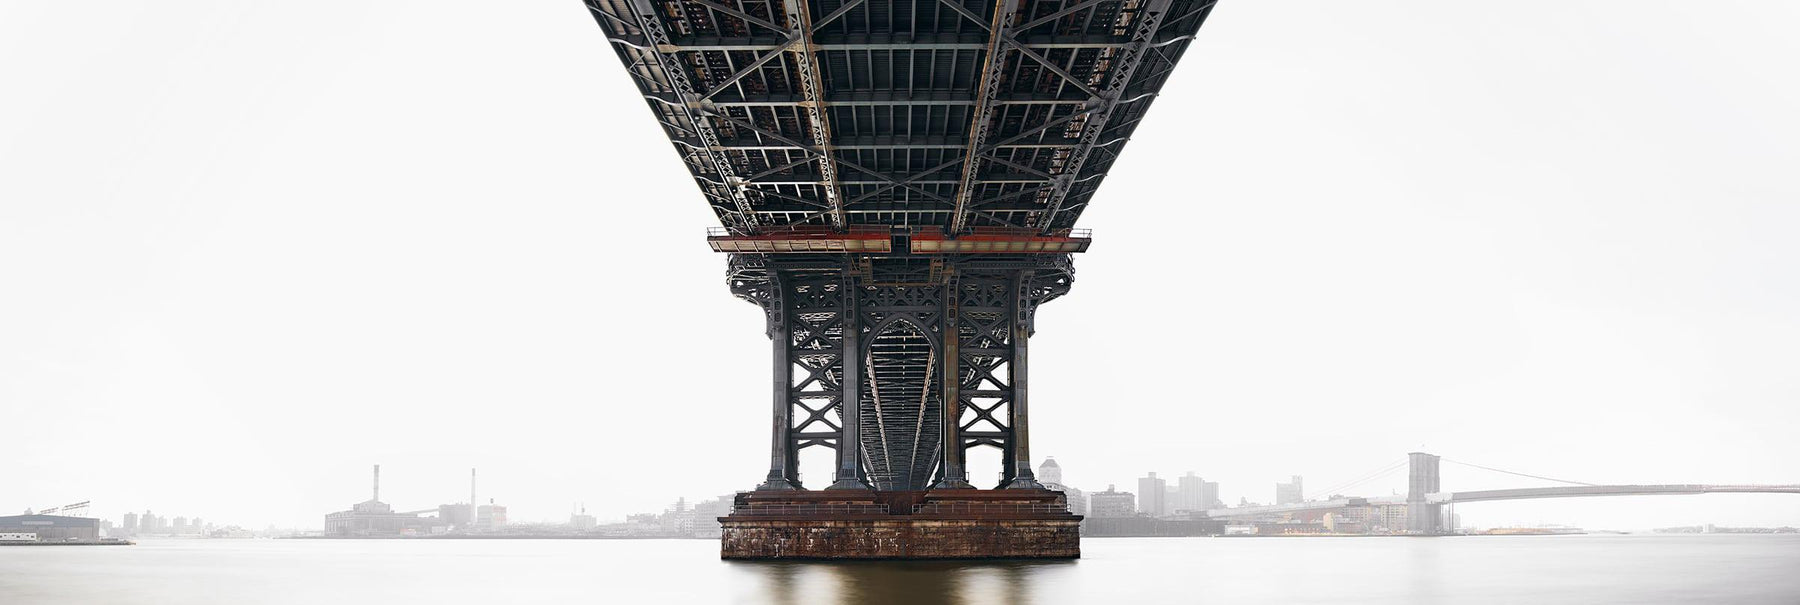 View from under the Manhattan Bridge with the city of New York overexposed in the background